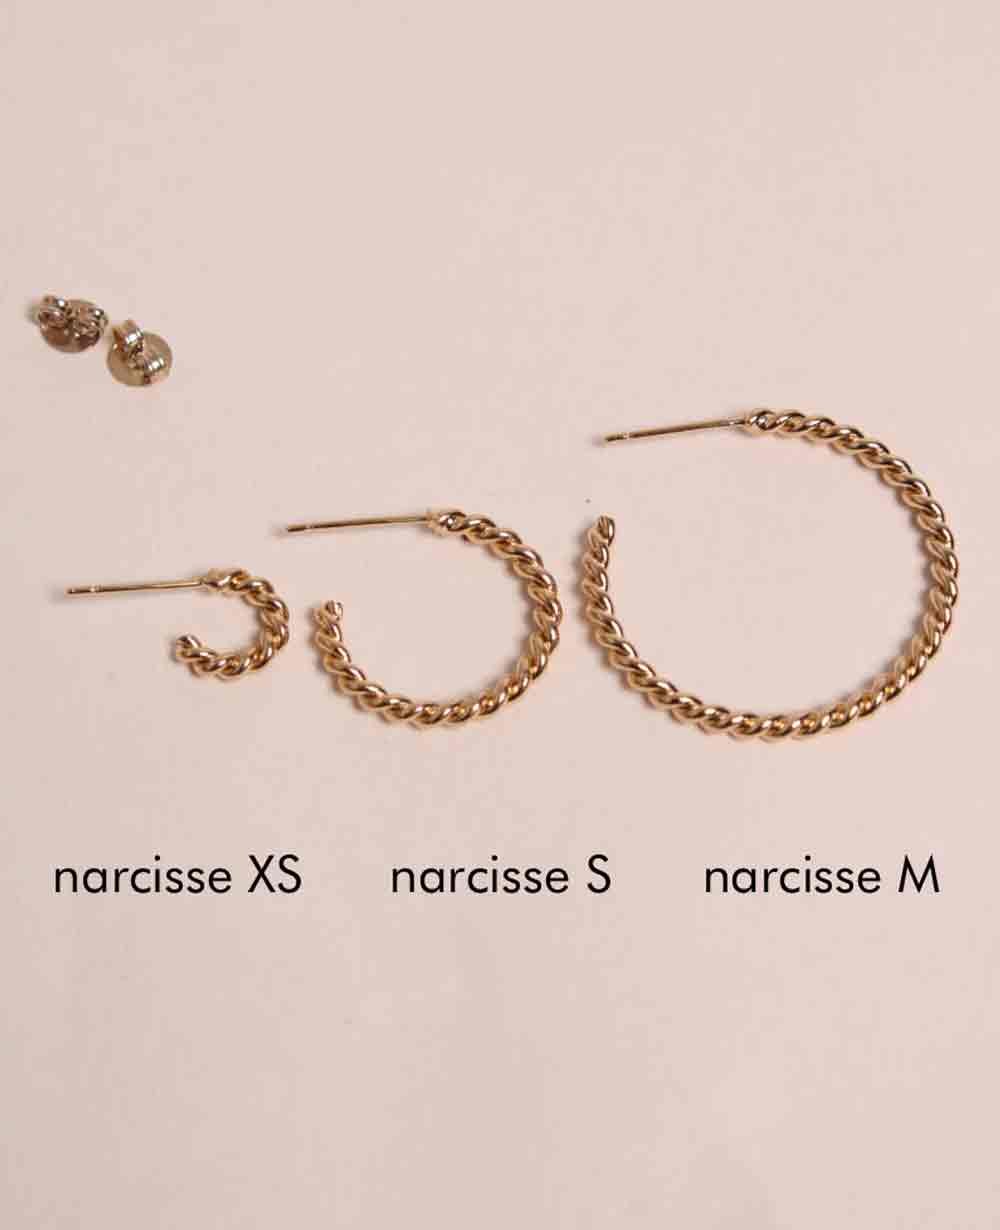 HOOPS "NARCISSE XS" GOLD